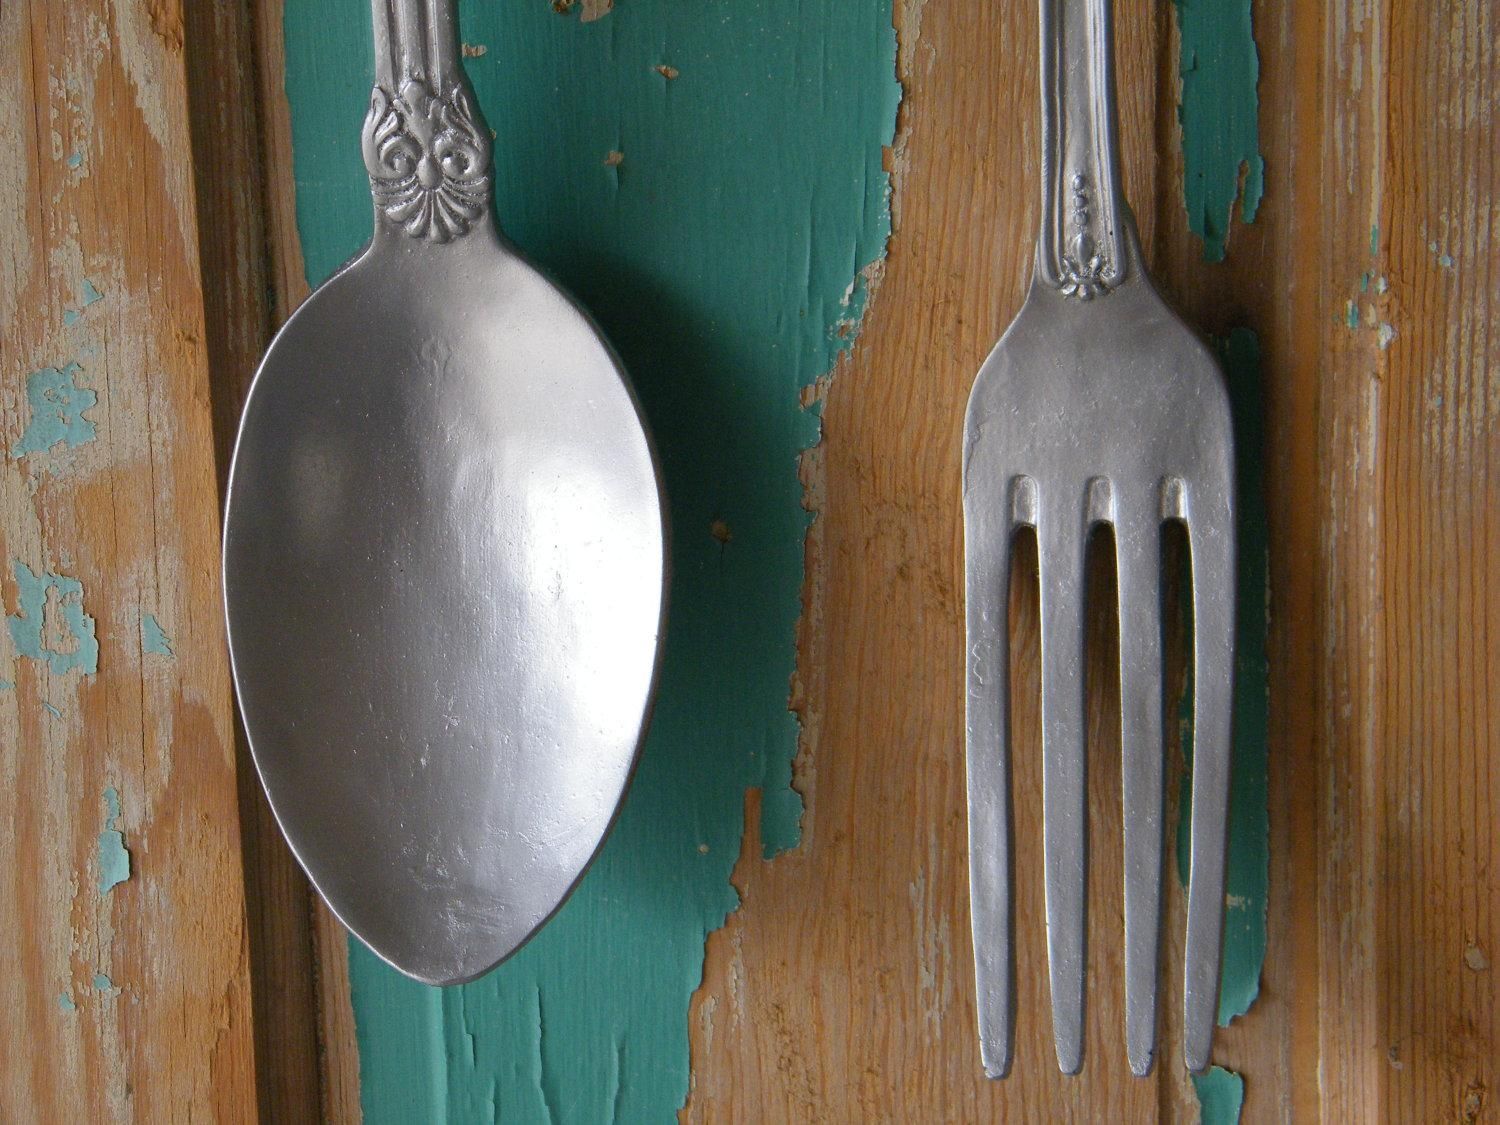 Wall Decor: Spoon Wall Decor Images (View 17 of 20)